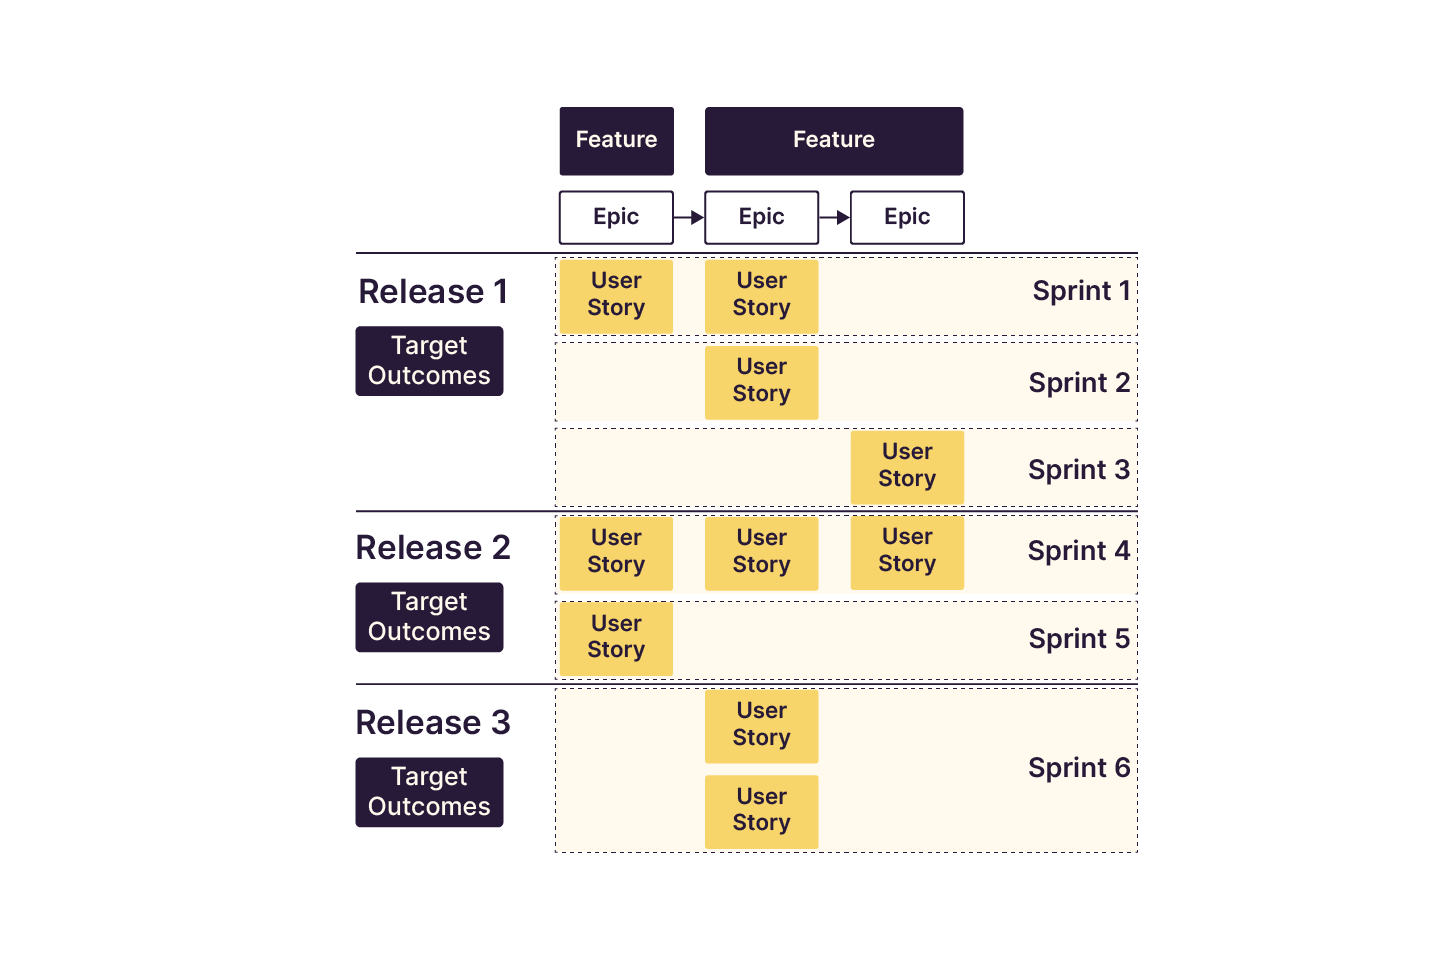 The image shows a user story map with sprint planning for Agile software development. It outlines two features broken into epics, distributed across three releases, each with targeted outcomes. The releases are further divided into six sprints.